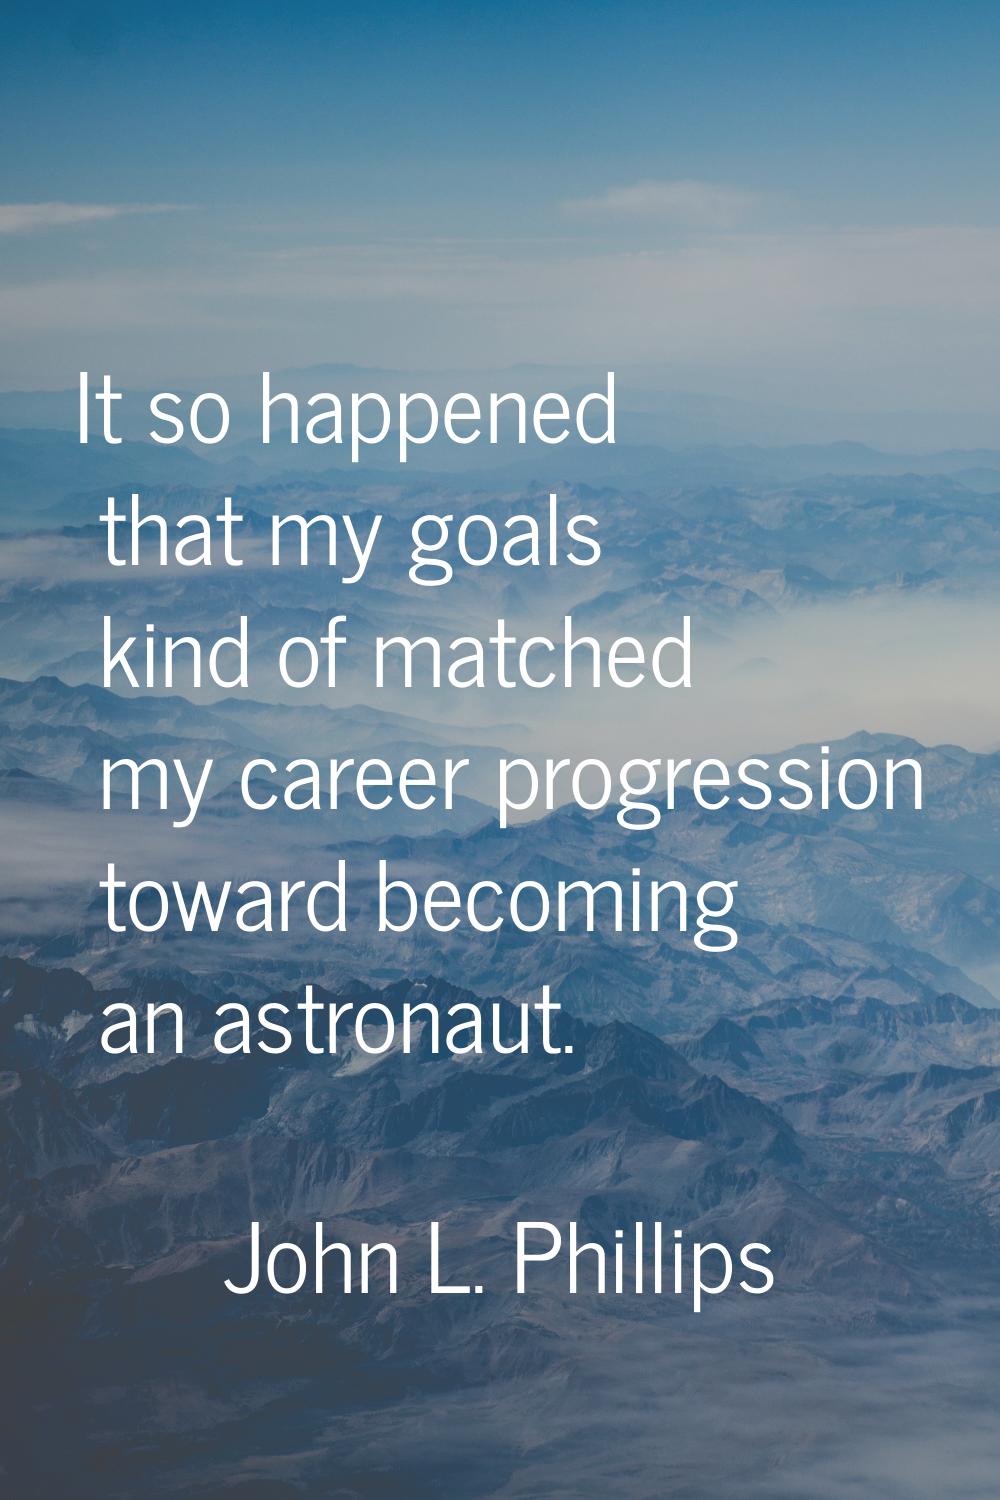 It so happened that my goals kind of matched my career progression toward becoming an astronaut.